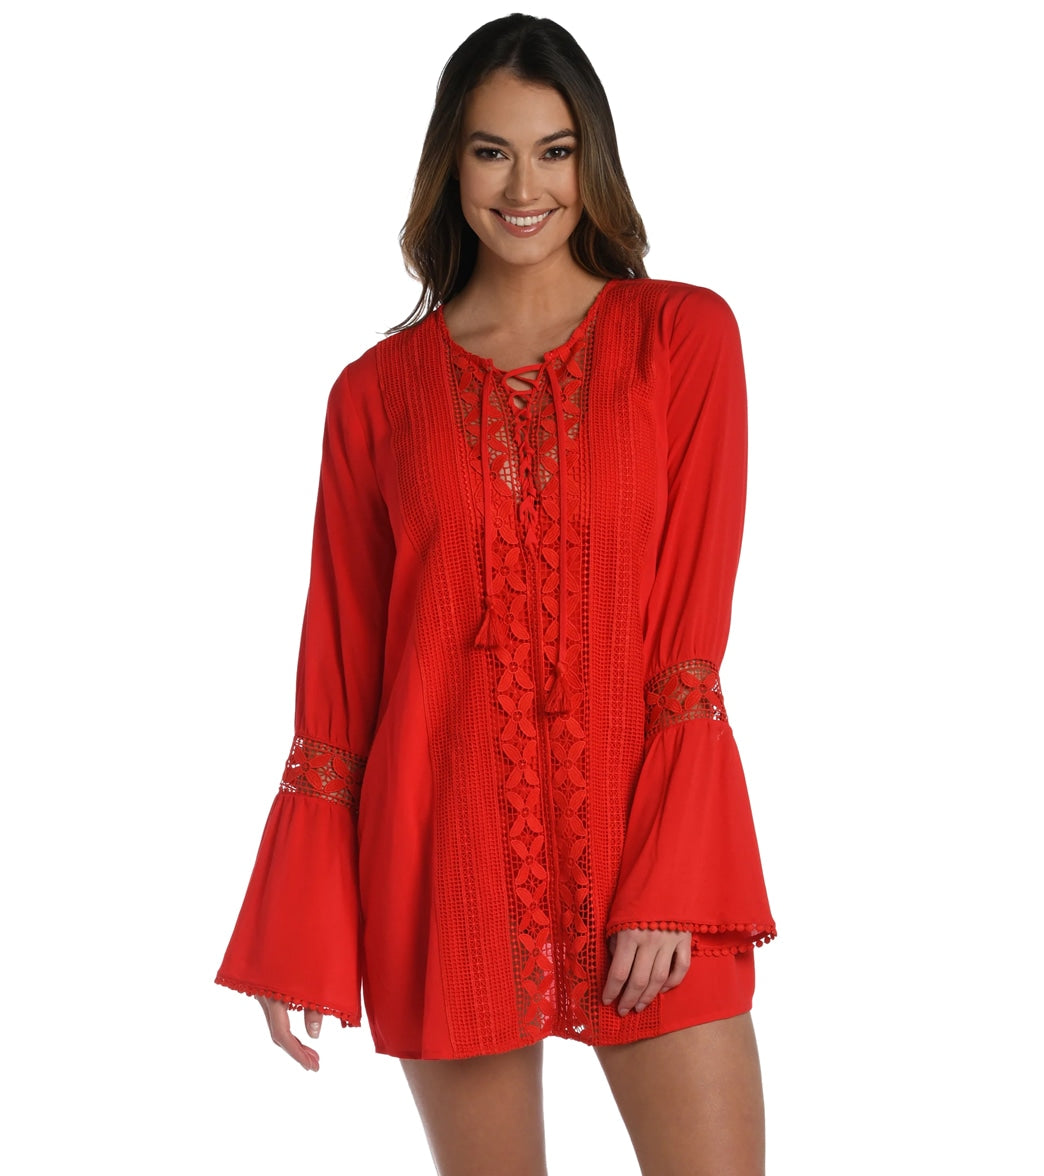 La Blanca Womens Coastal Covers Lace Up Cover Up Tunic